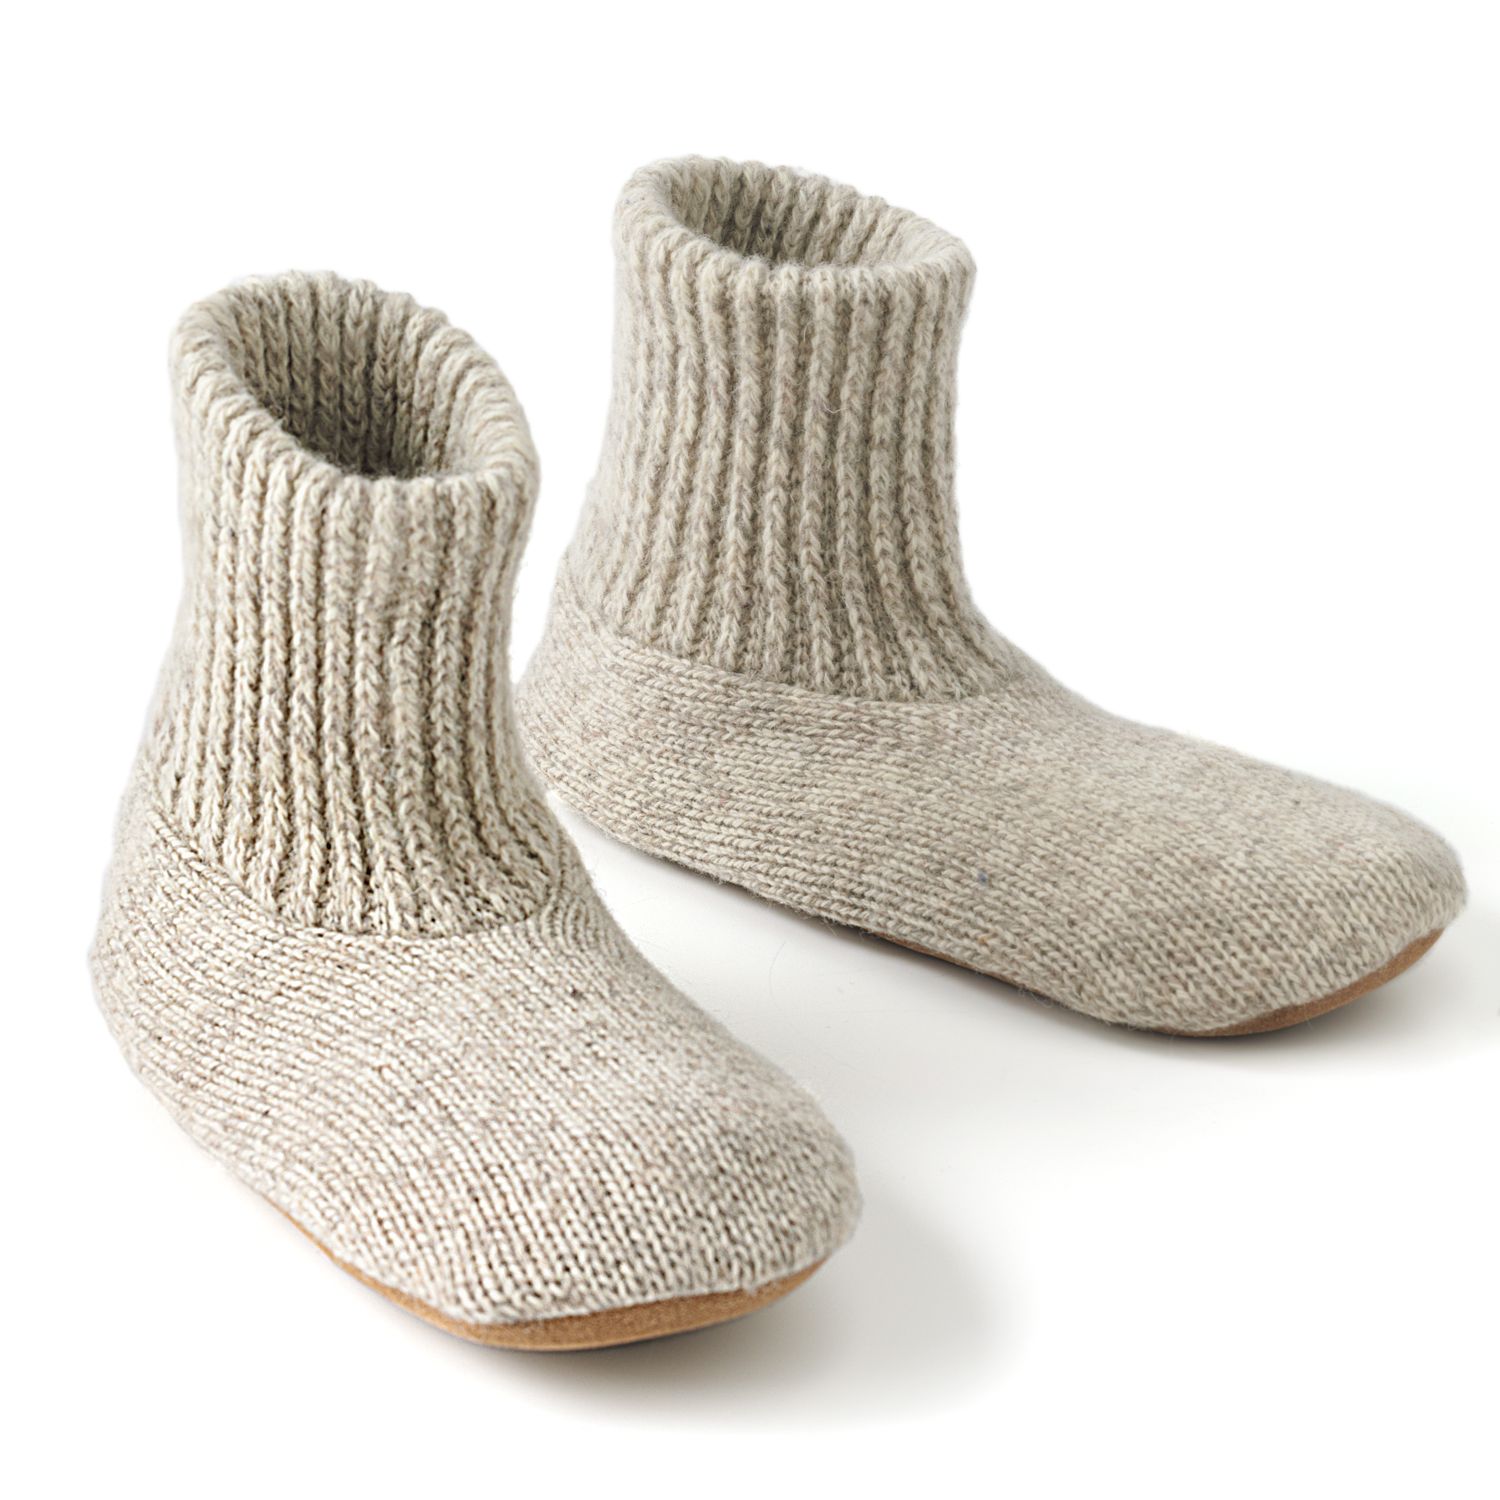 men's sock slippers with grippers